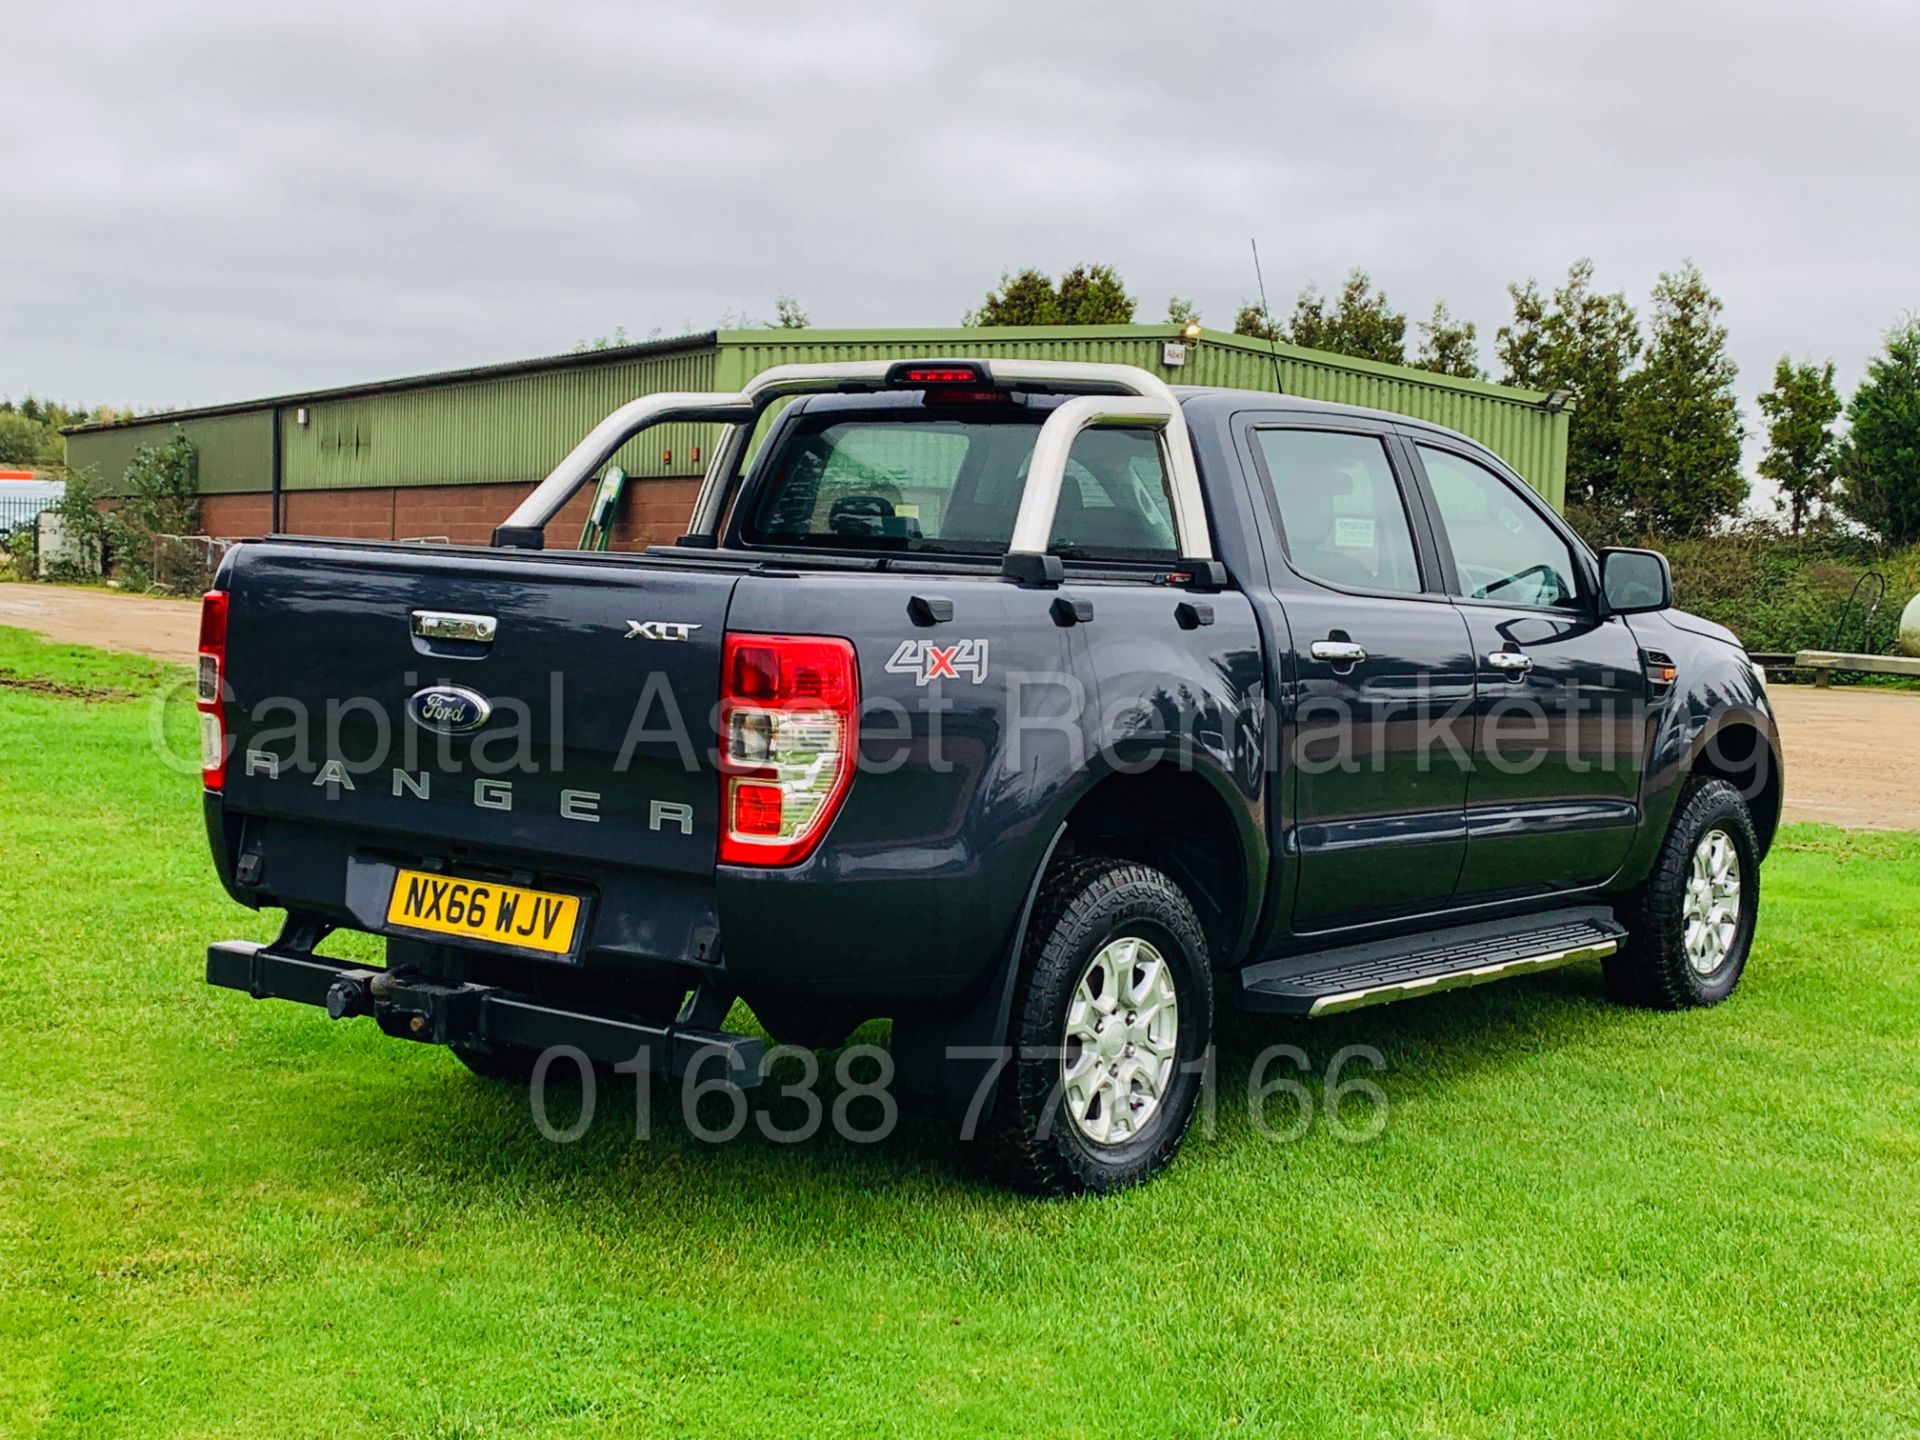 (On Sale) FORD RANGER *DOUBLE CAB - 4x4 PICK-UP* (66 REG) '2.2 TDCI - 160 BHP -6 SPEED' (1 OWNER) - Image 12 of 51